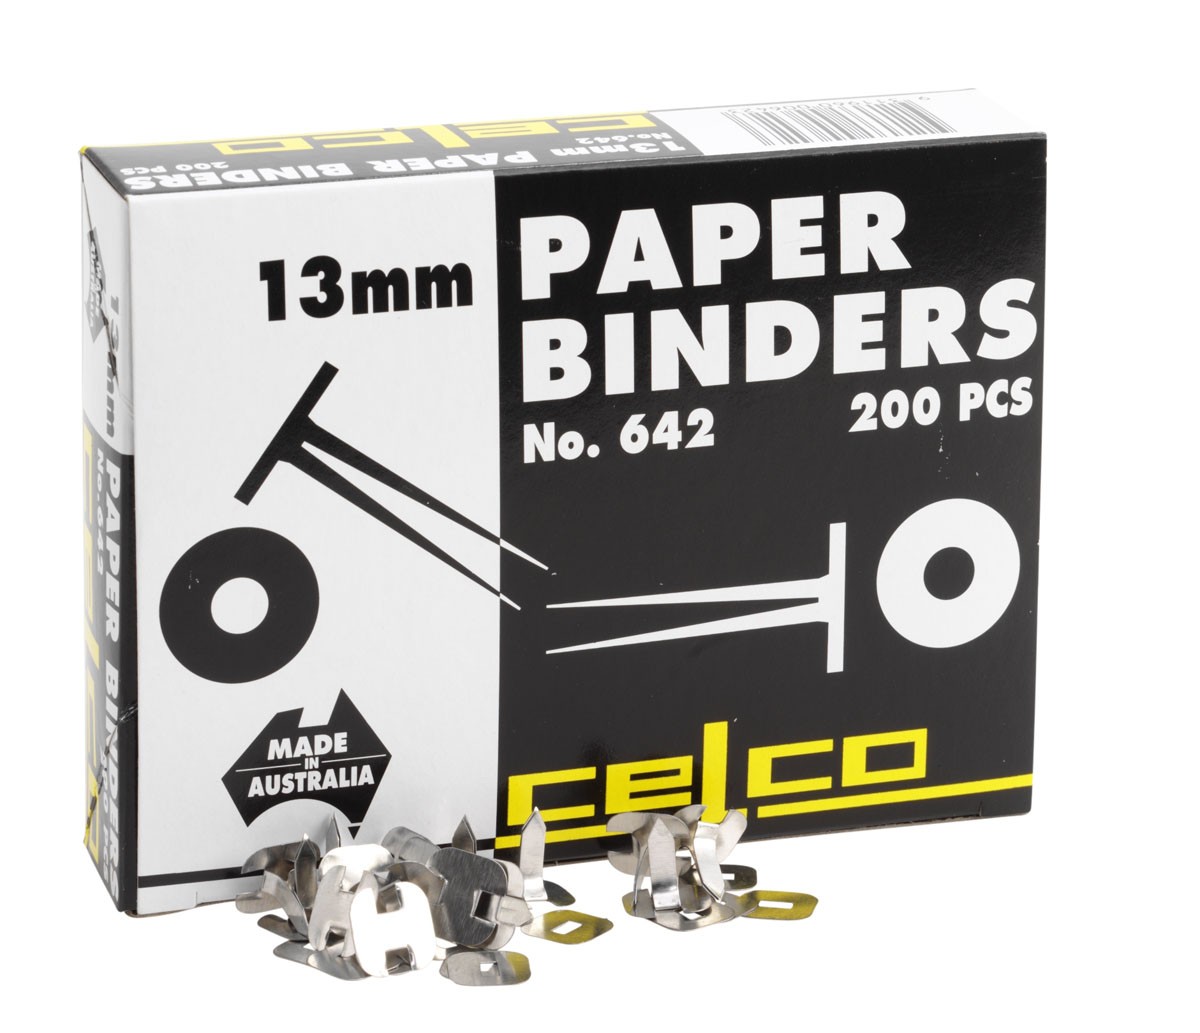 CELCO PAPER BINDERS 13mm #642 (price excludes gst)